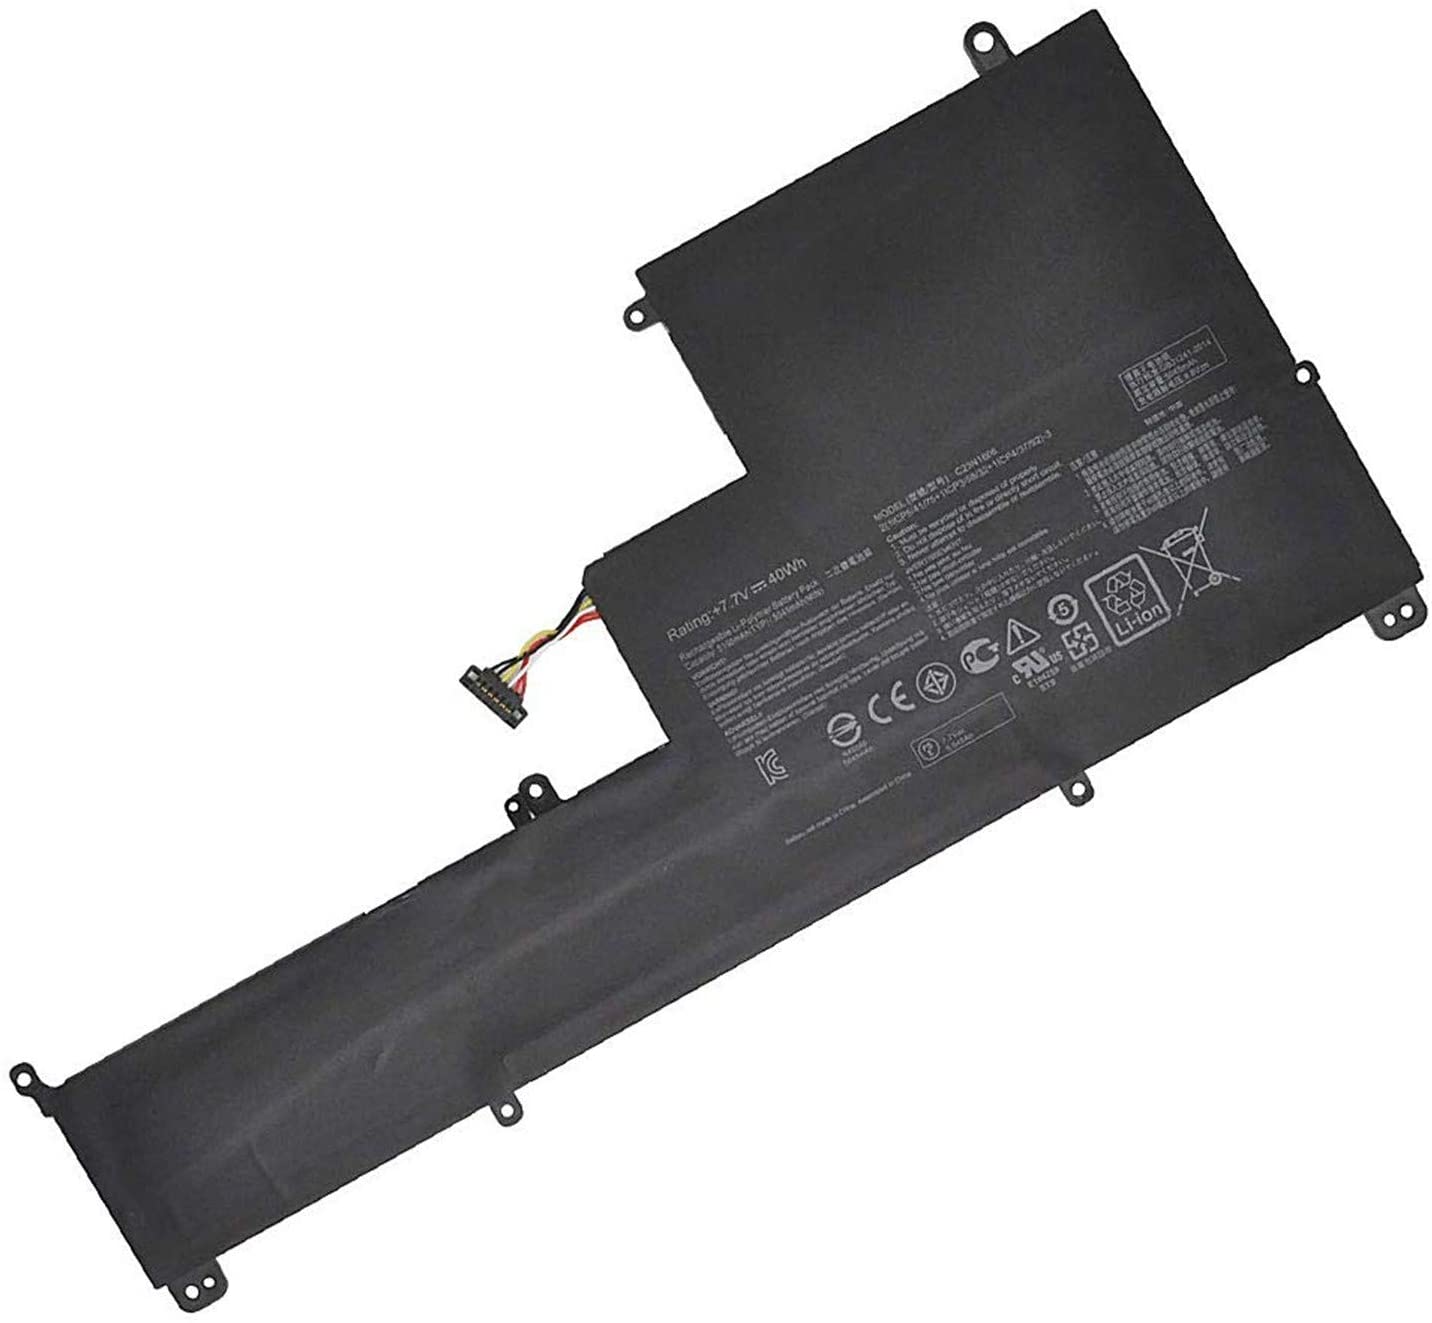 C23N1606 ASUS Zenbook 3 UX390UA-GS031T UX390UA-GS034T GS039T GS046T compatible battery